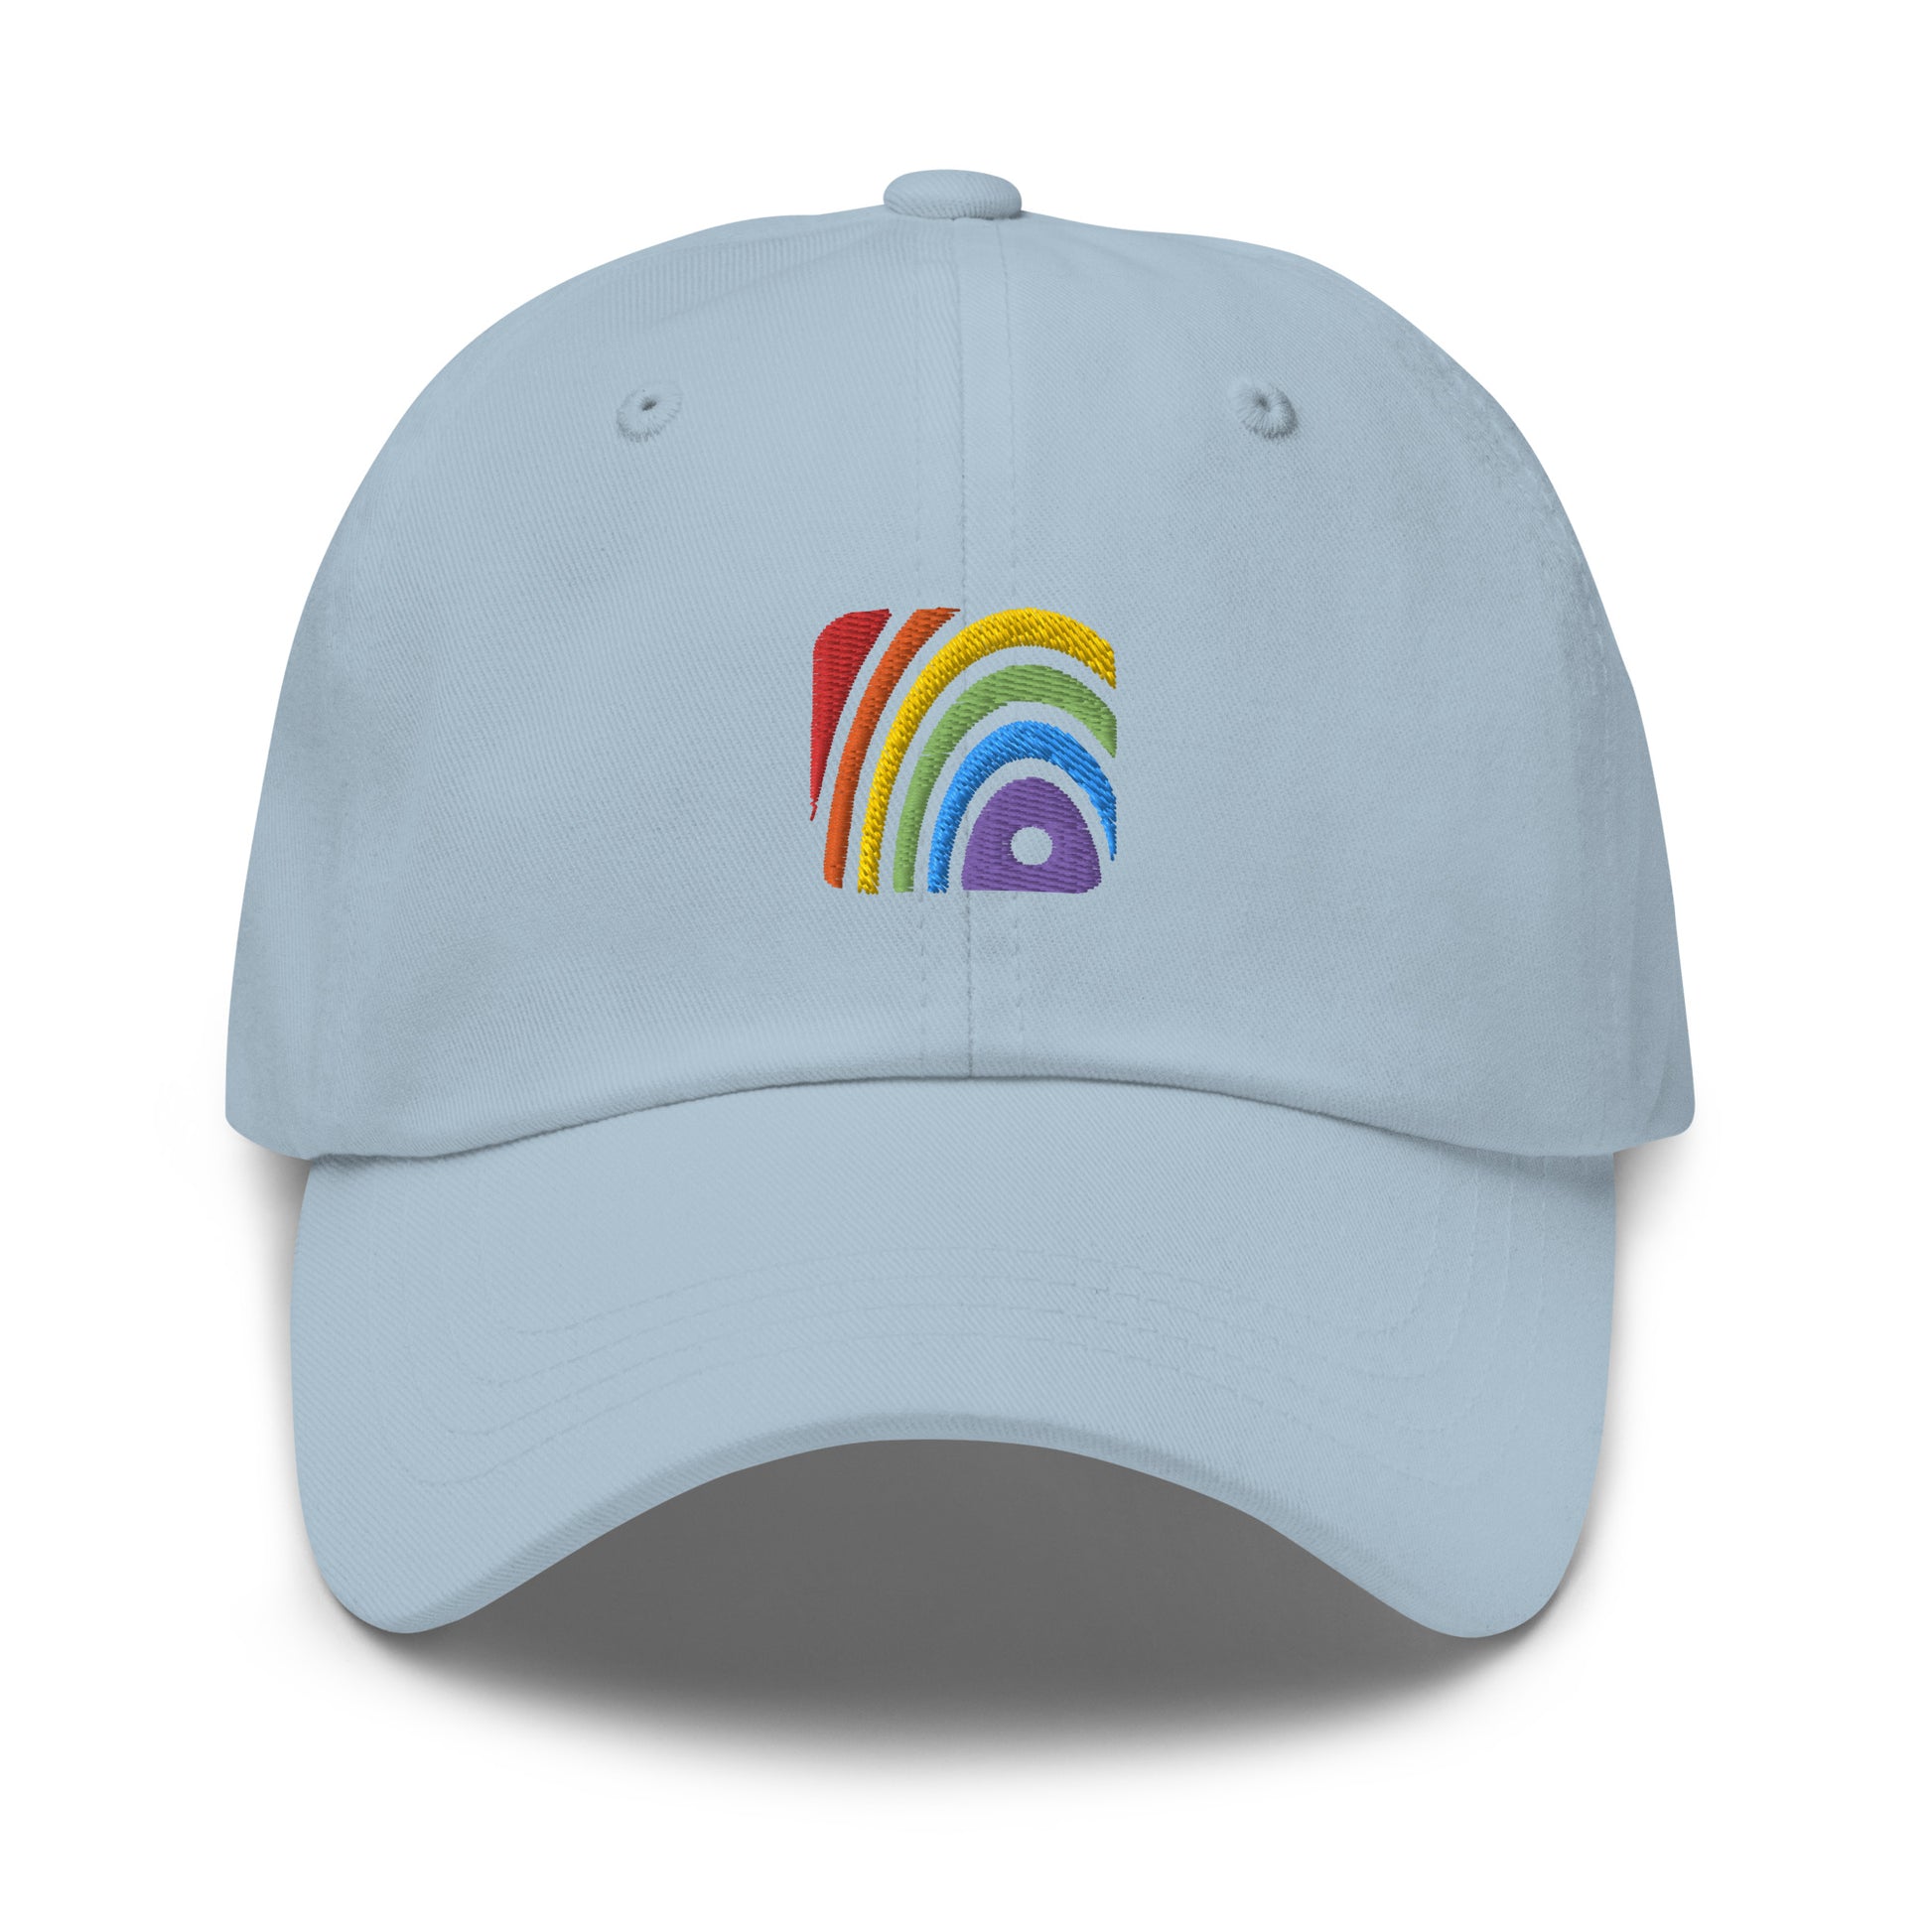 Light Blue baseball hat featuring rainbow design embroidery with a low profile, adjustable strap.